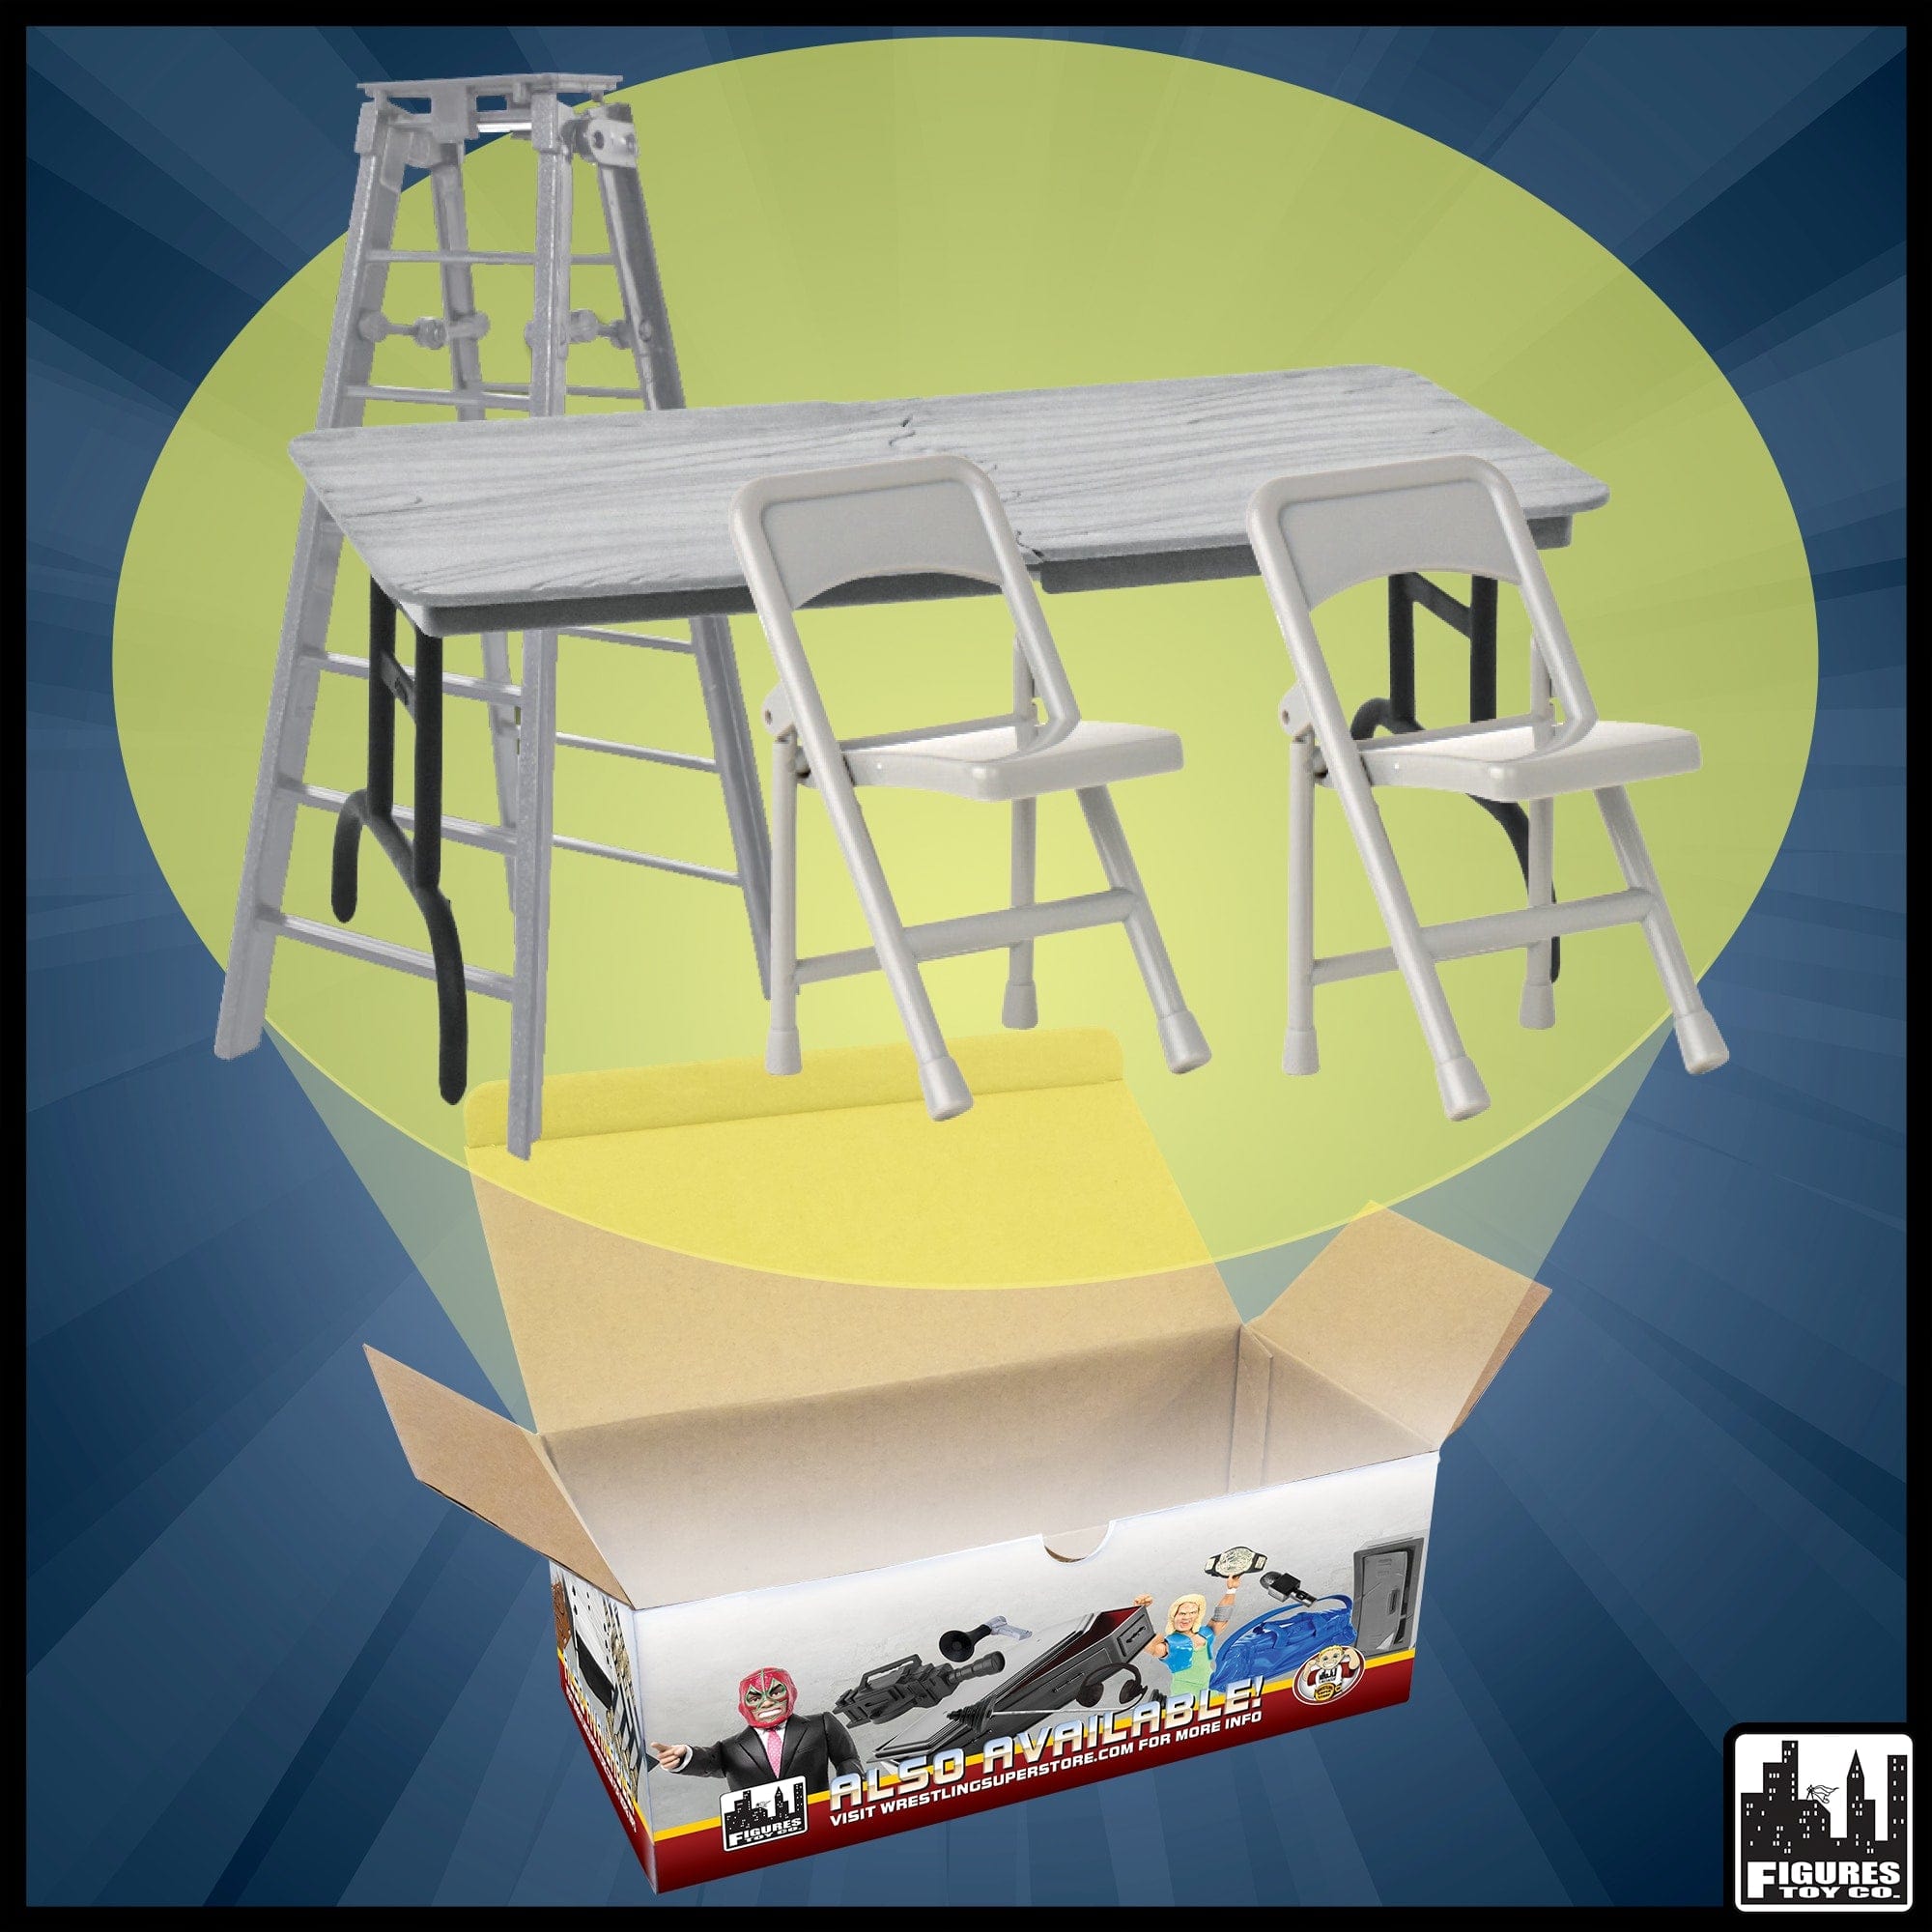 ULTIMATE Ladder, Table & Chairs Silver Playset for WWE Wrestling Action Figures